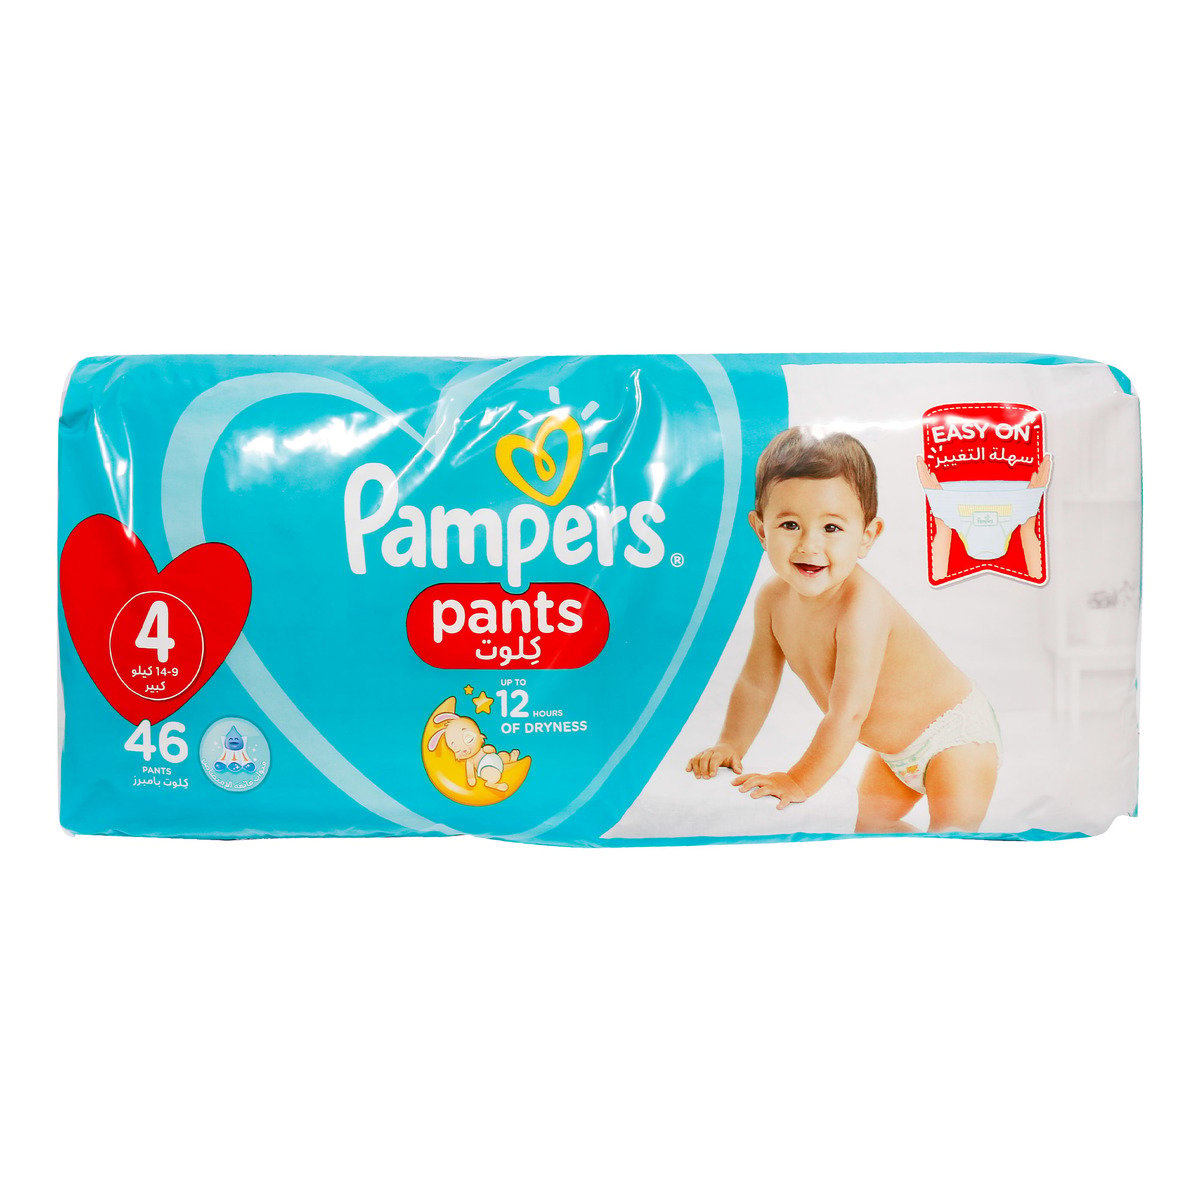 Pampers Diaper Pants Value Pack Size 4 9-14kg 46 Count